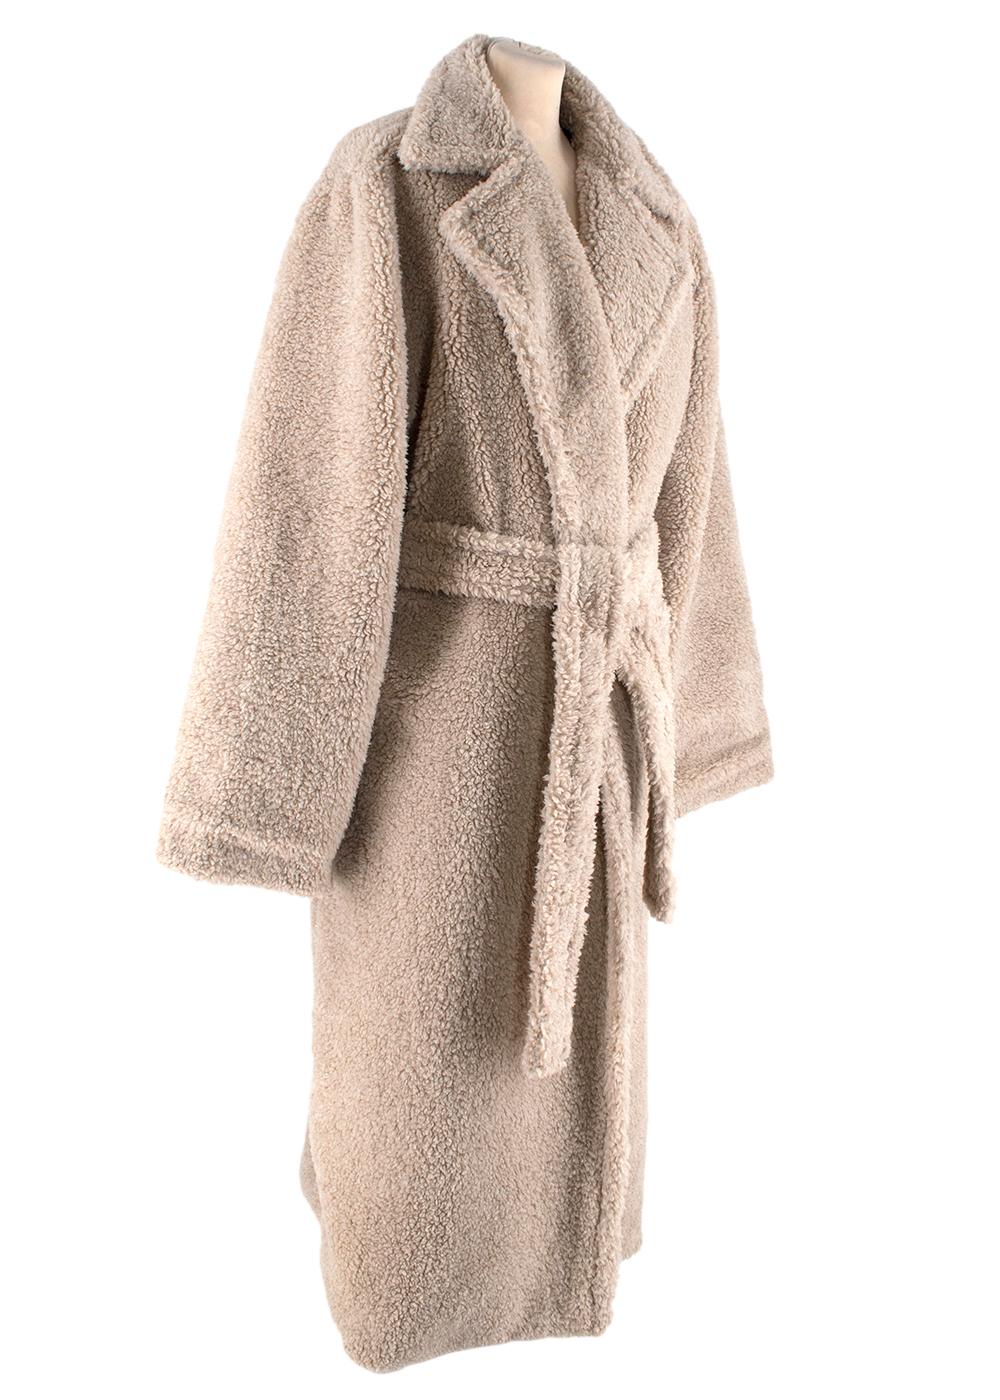 Anton Belinskiy Faux-Shearling Robe-Coat 

-Beige faux-shearling robe-coat from Anton Belinskiy featuring a notched collar, long sleeves, a belted waist and patch pockets on the right.

Measurements:

56cm shoulder to shoulder 
60cm chest 
63cm